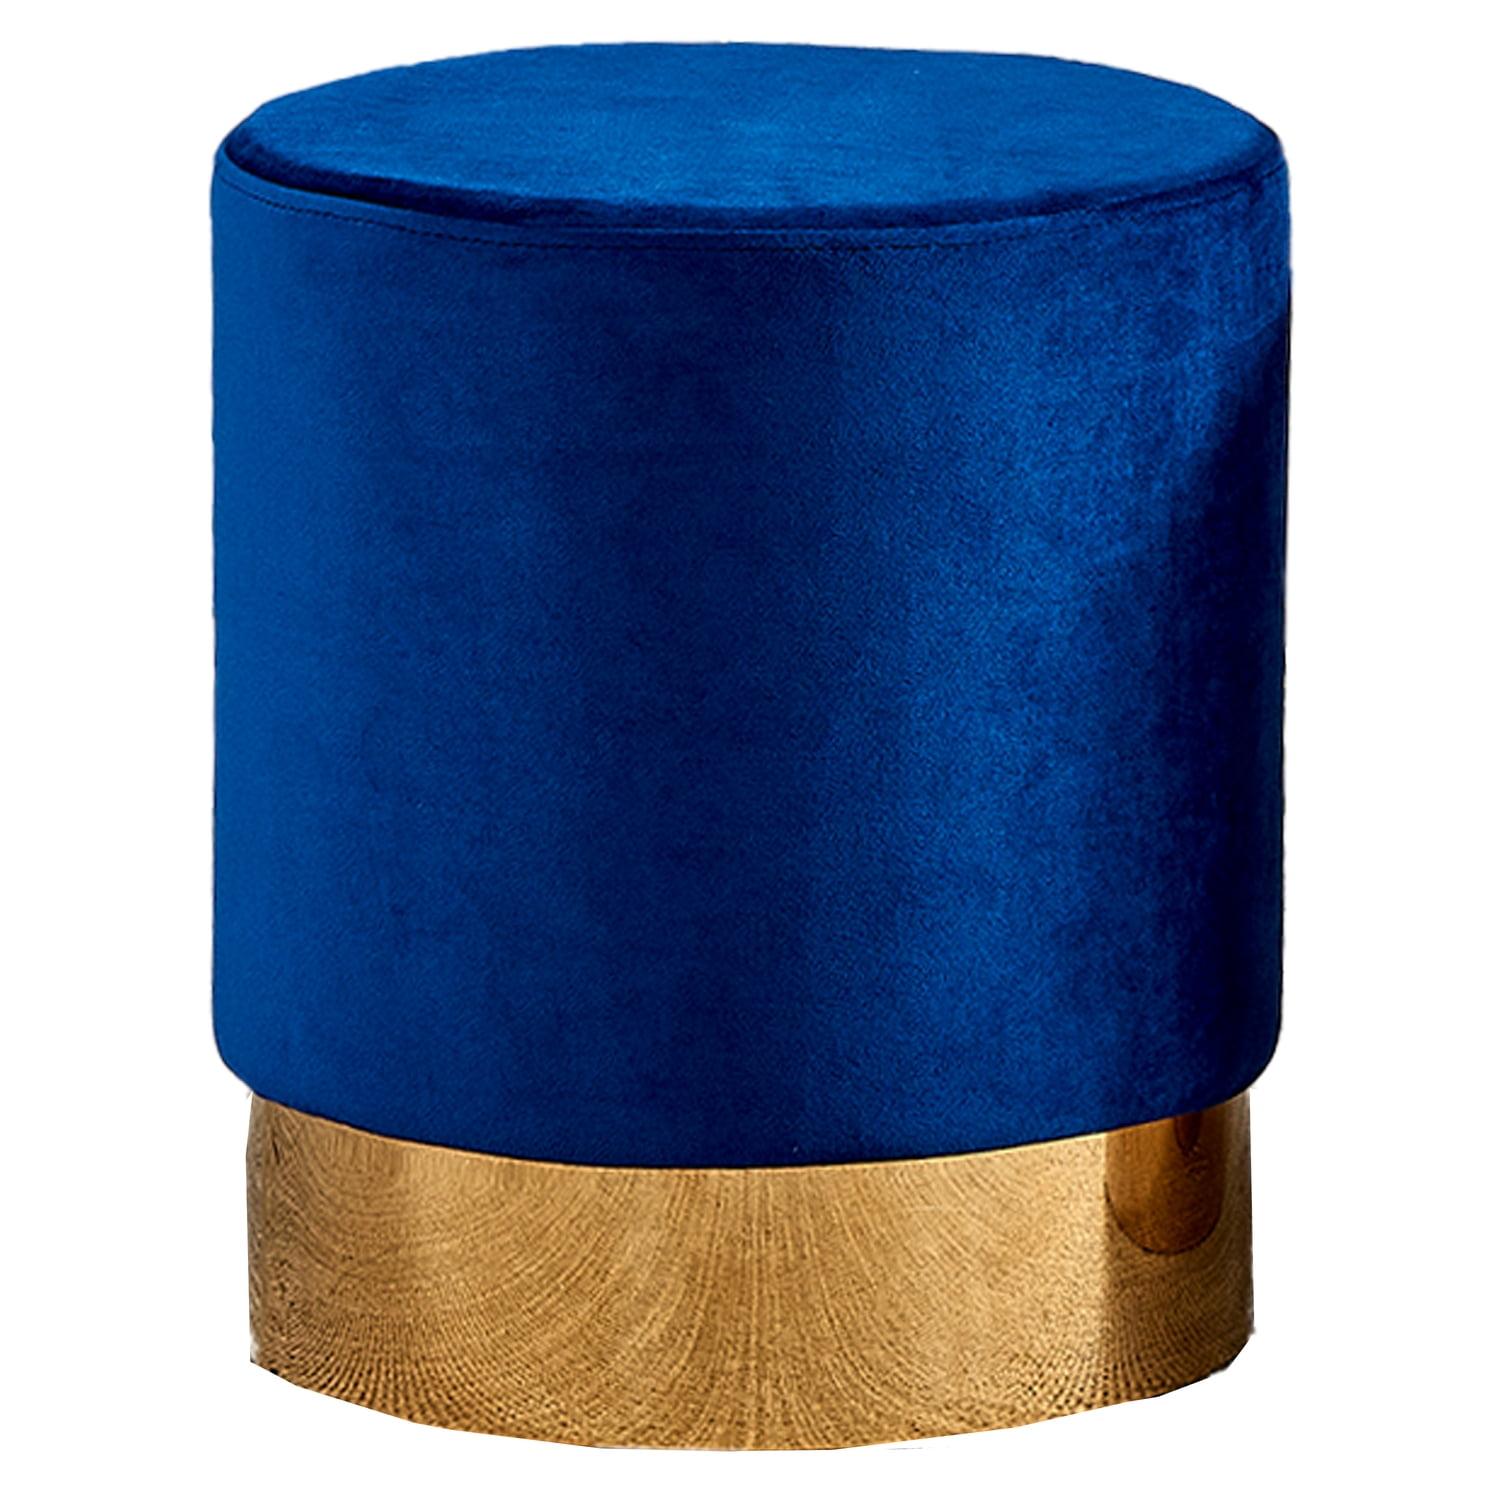 Quirky Round Velvet and Gold Accent Stool in Blue